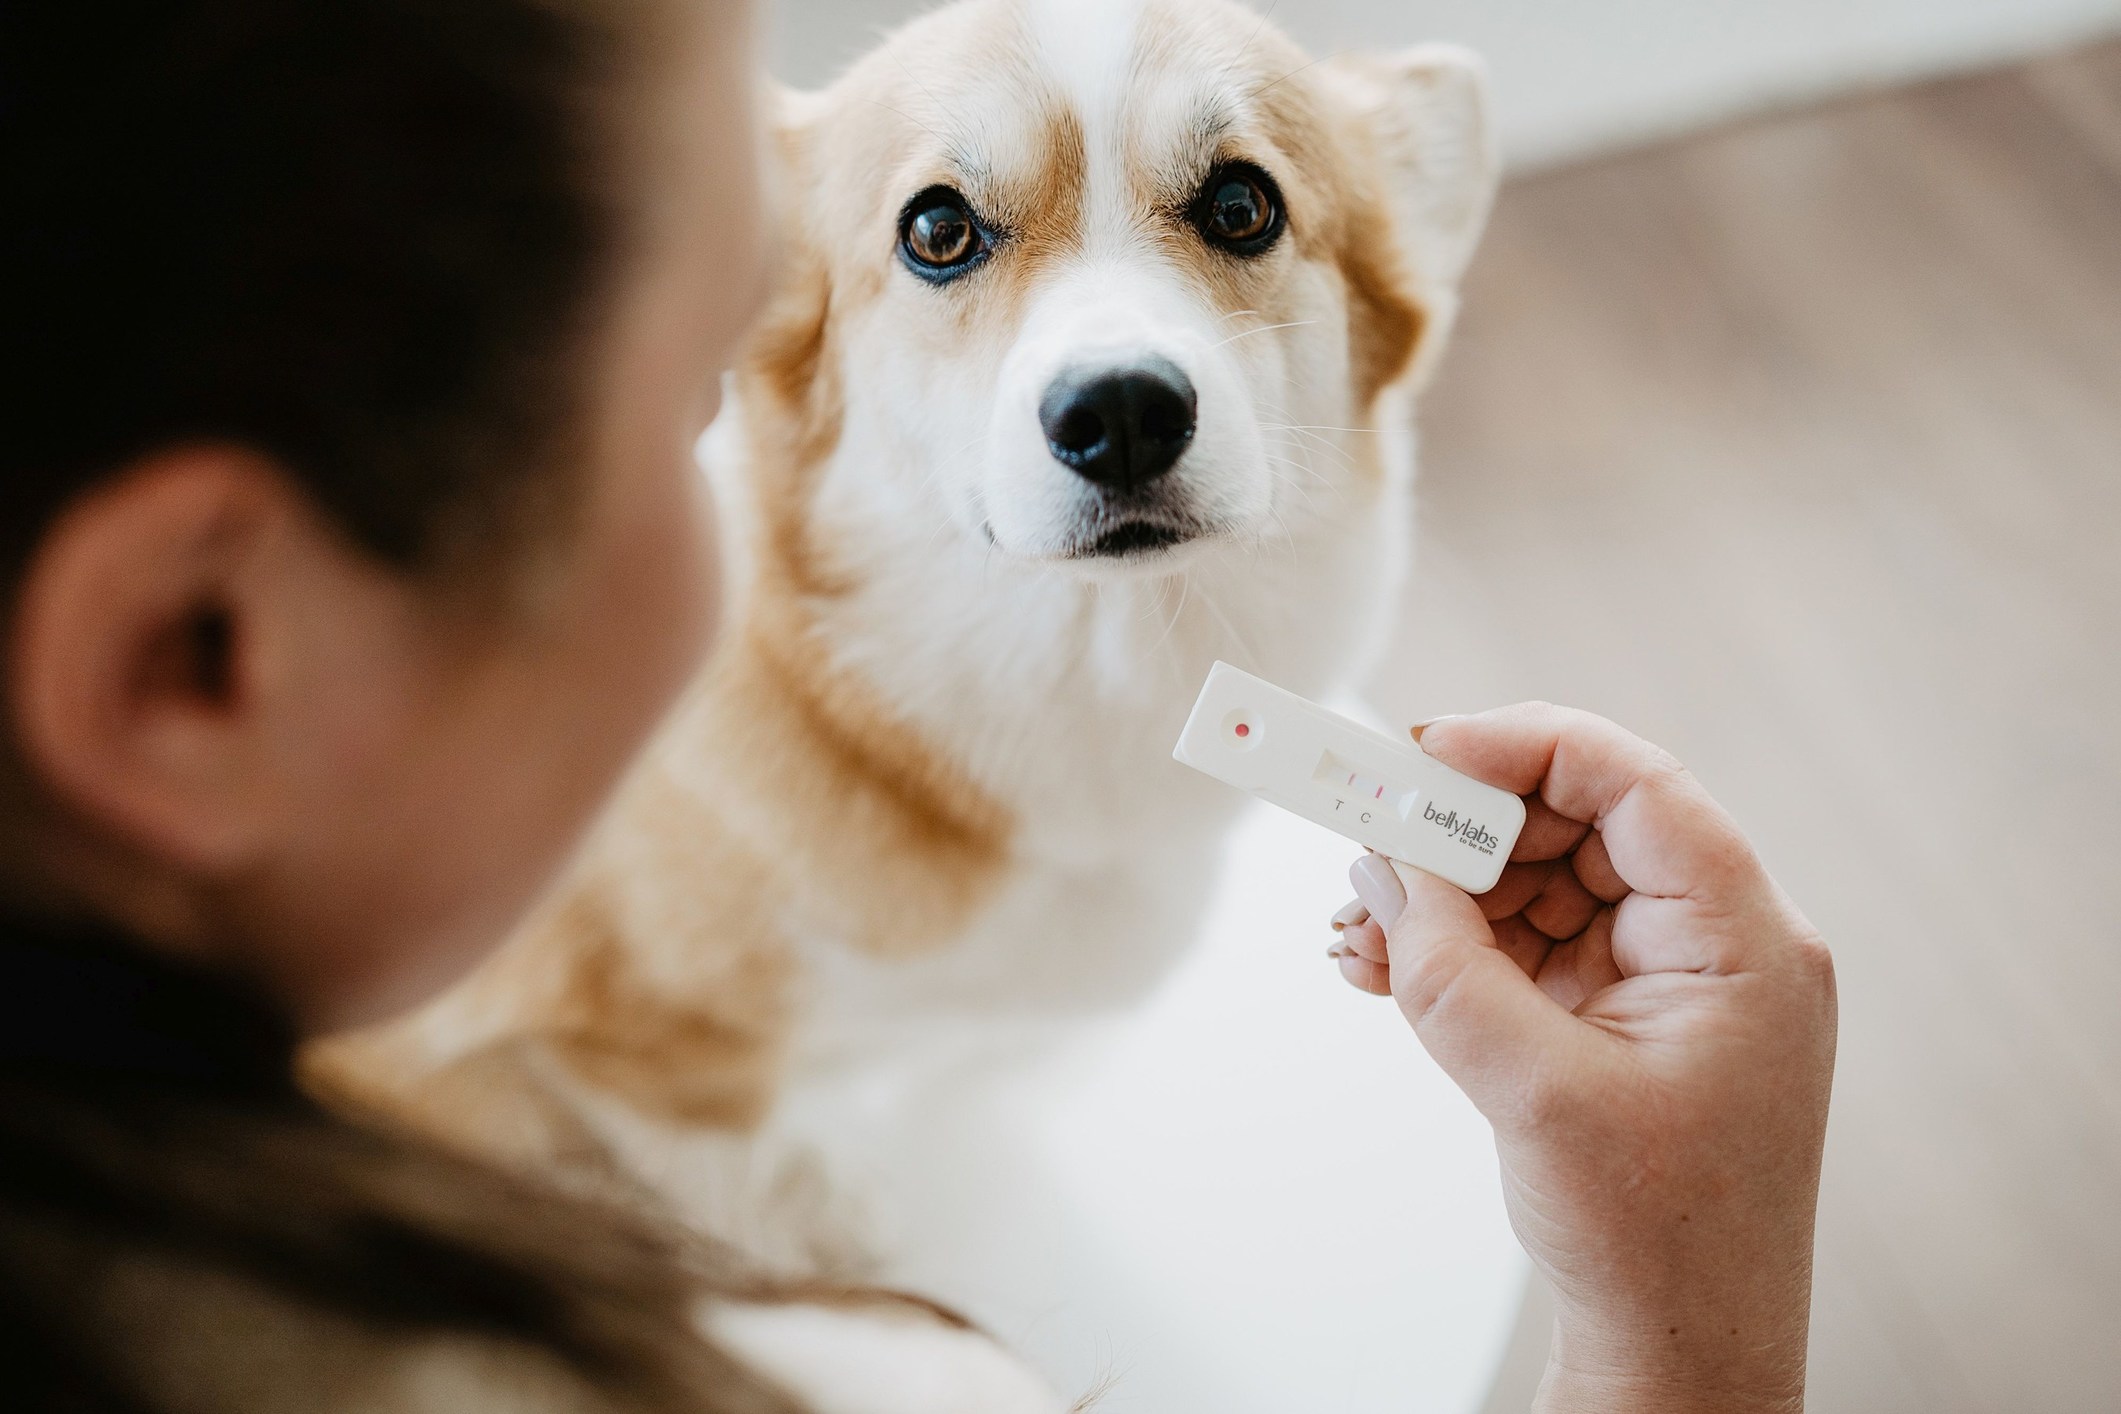 Bellylabs Launches World's First Dog Pregnancy Rapid Test For Home Use